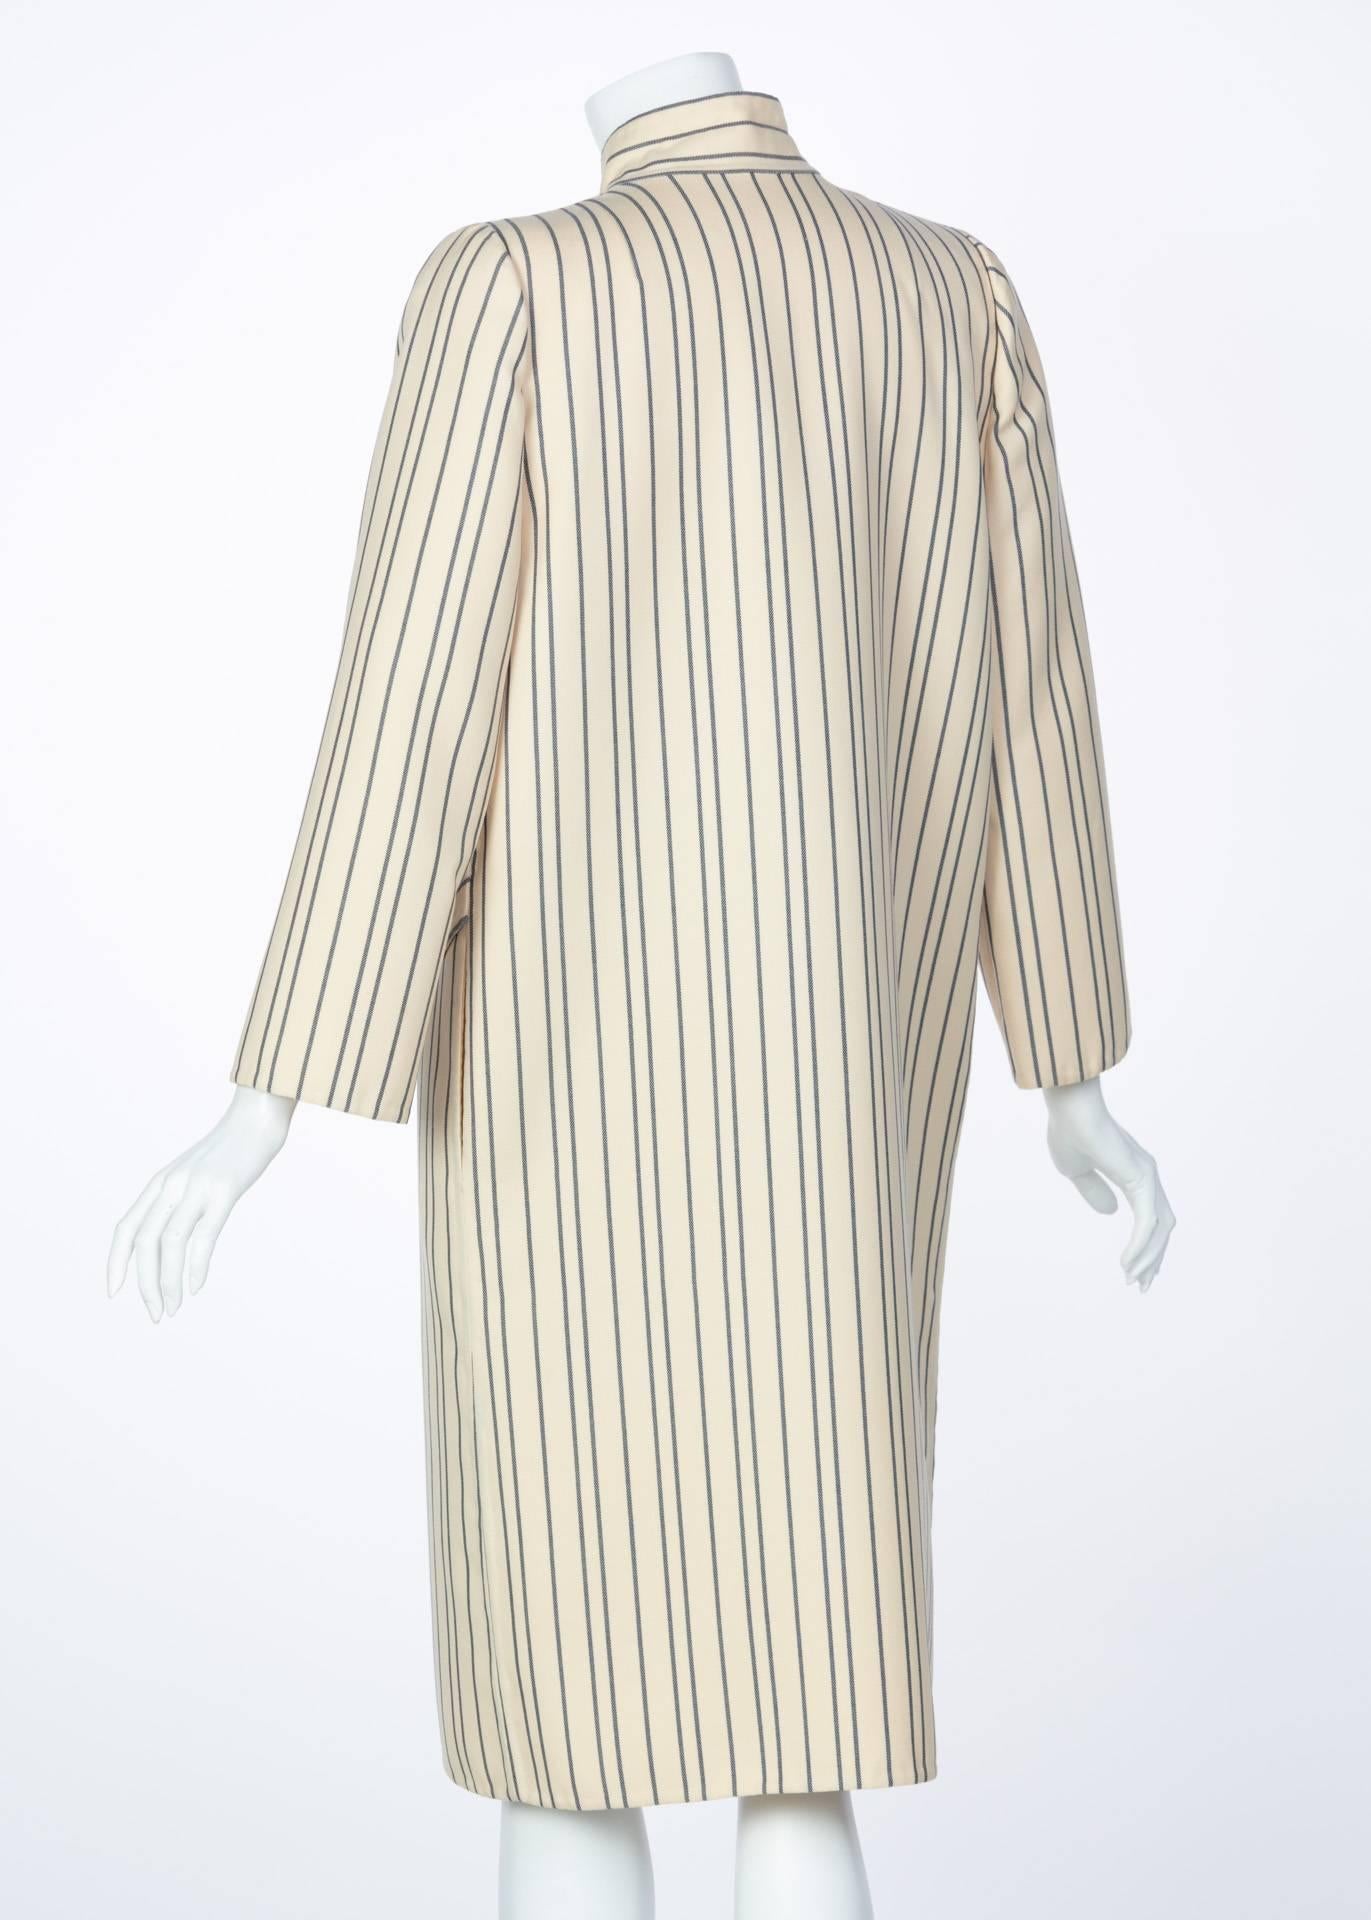 Women's 1990s Pauline Trigere creme and Navy Striped Wool Twill Coat Skirt Suit